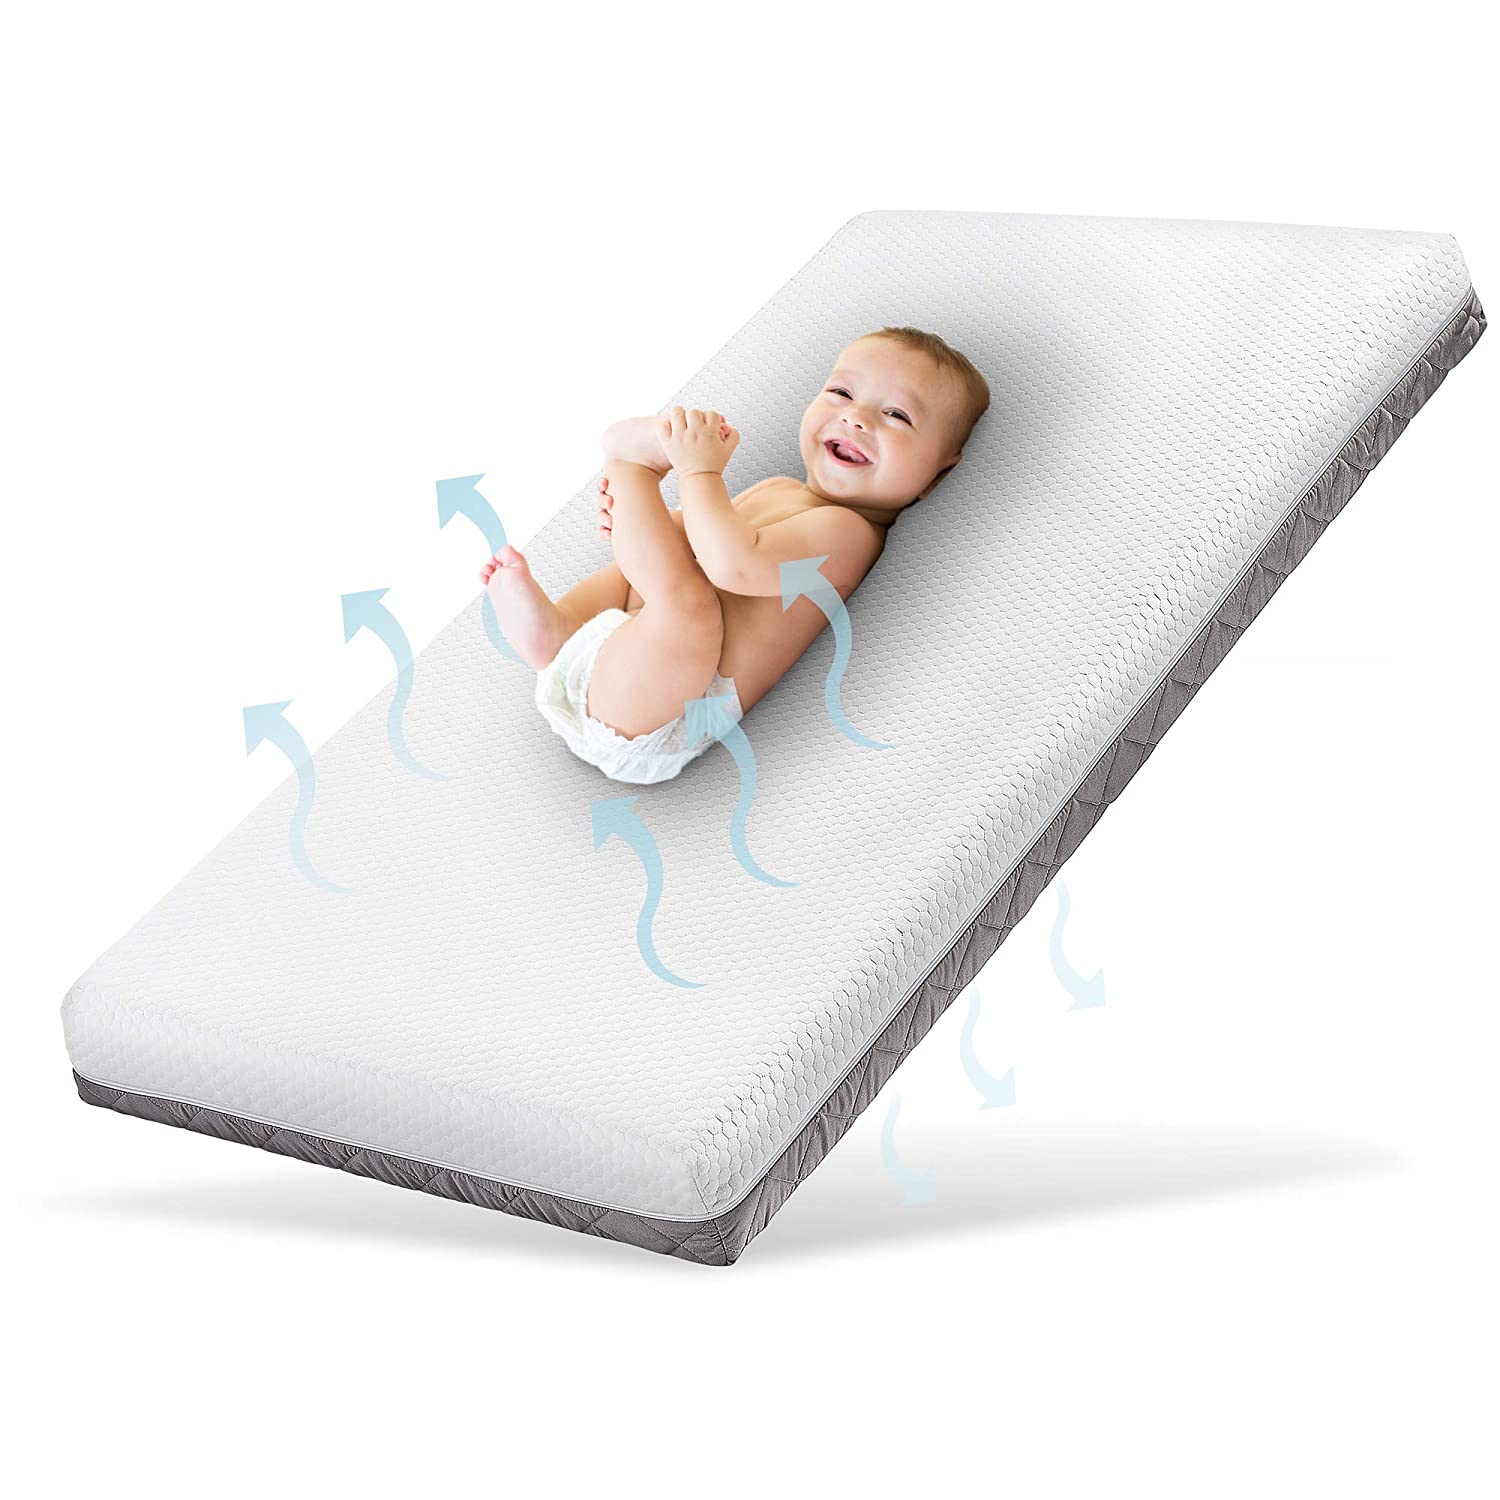 Ehrenkind® Royal Baby Mattress 60 x 120 cm Mattress 120 x 60 cm with Innovative 3D Mesh and Hygiene Tencel Cover Waterproof and Breathable